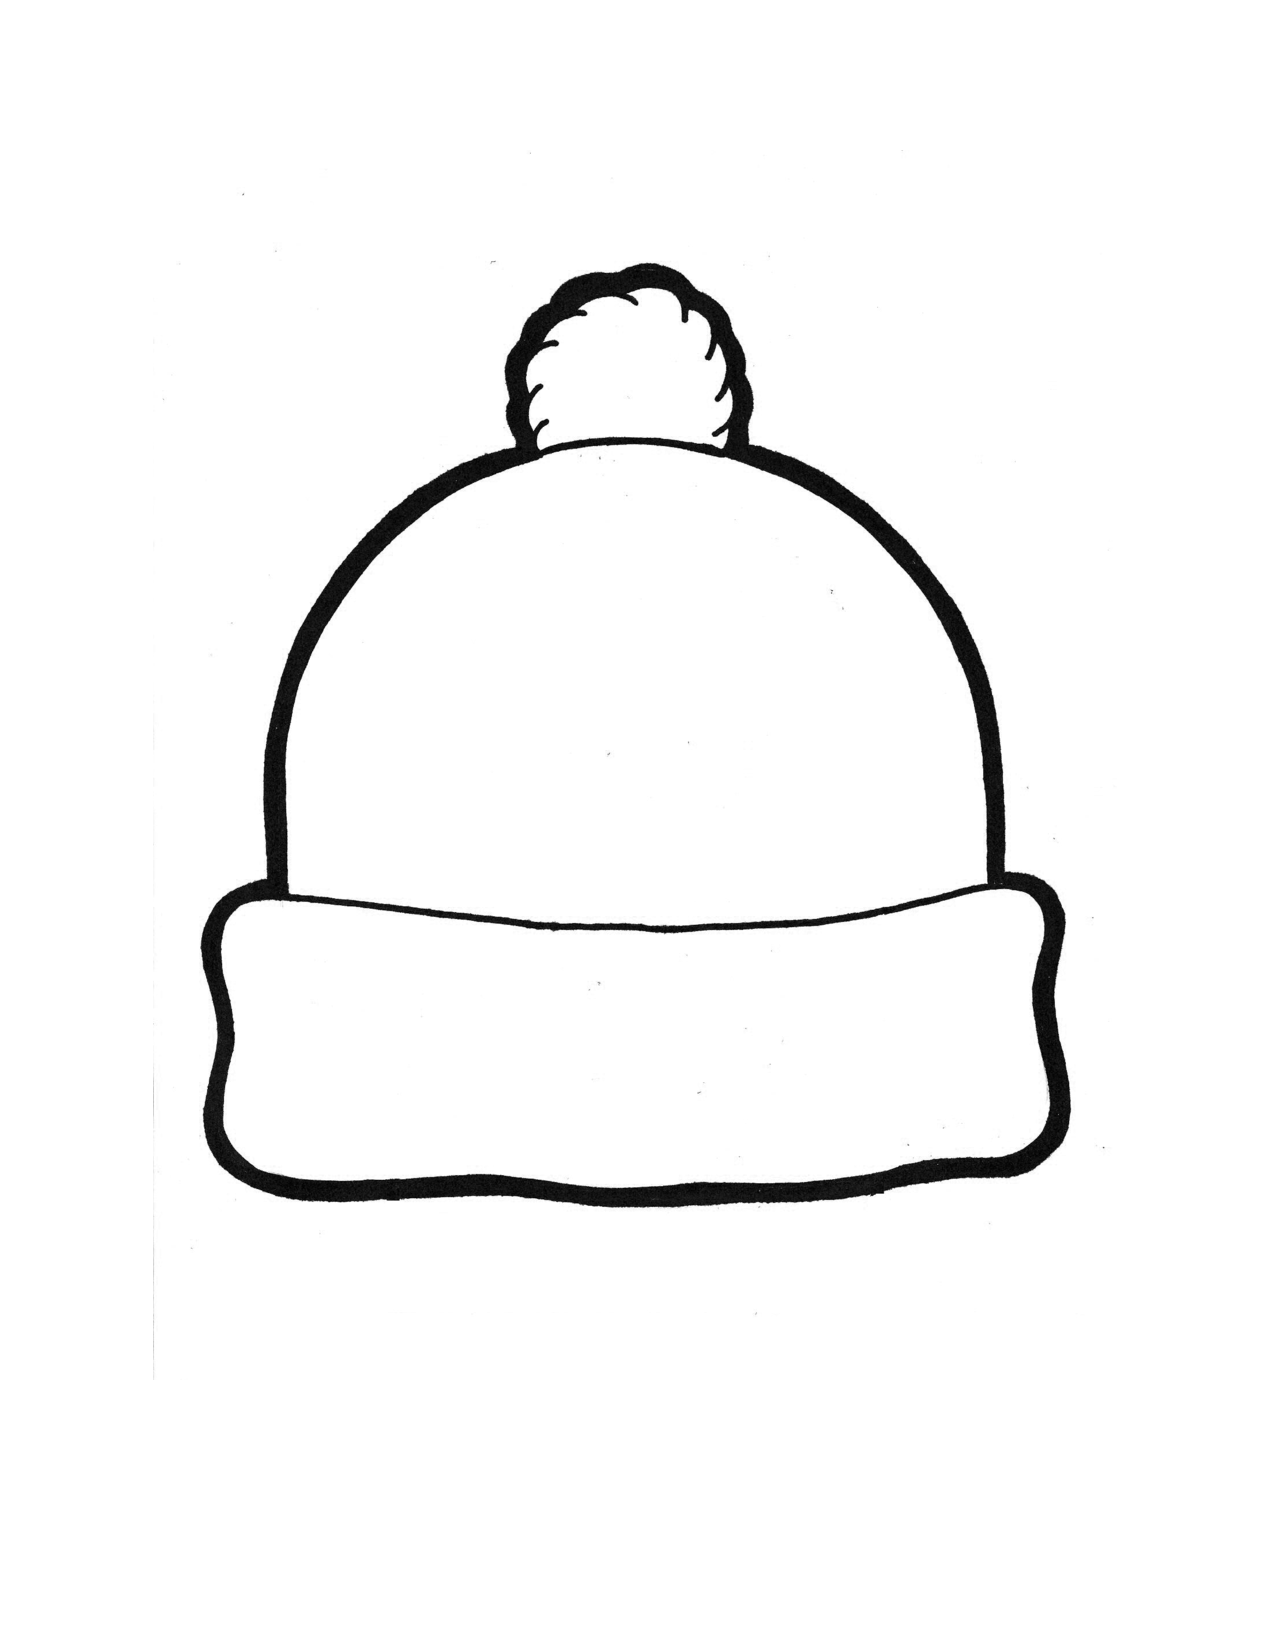 Free Printable Winter Hat Template